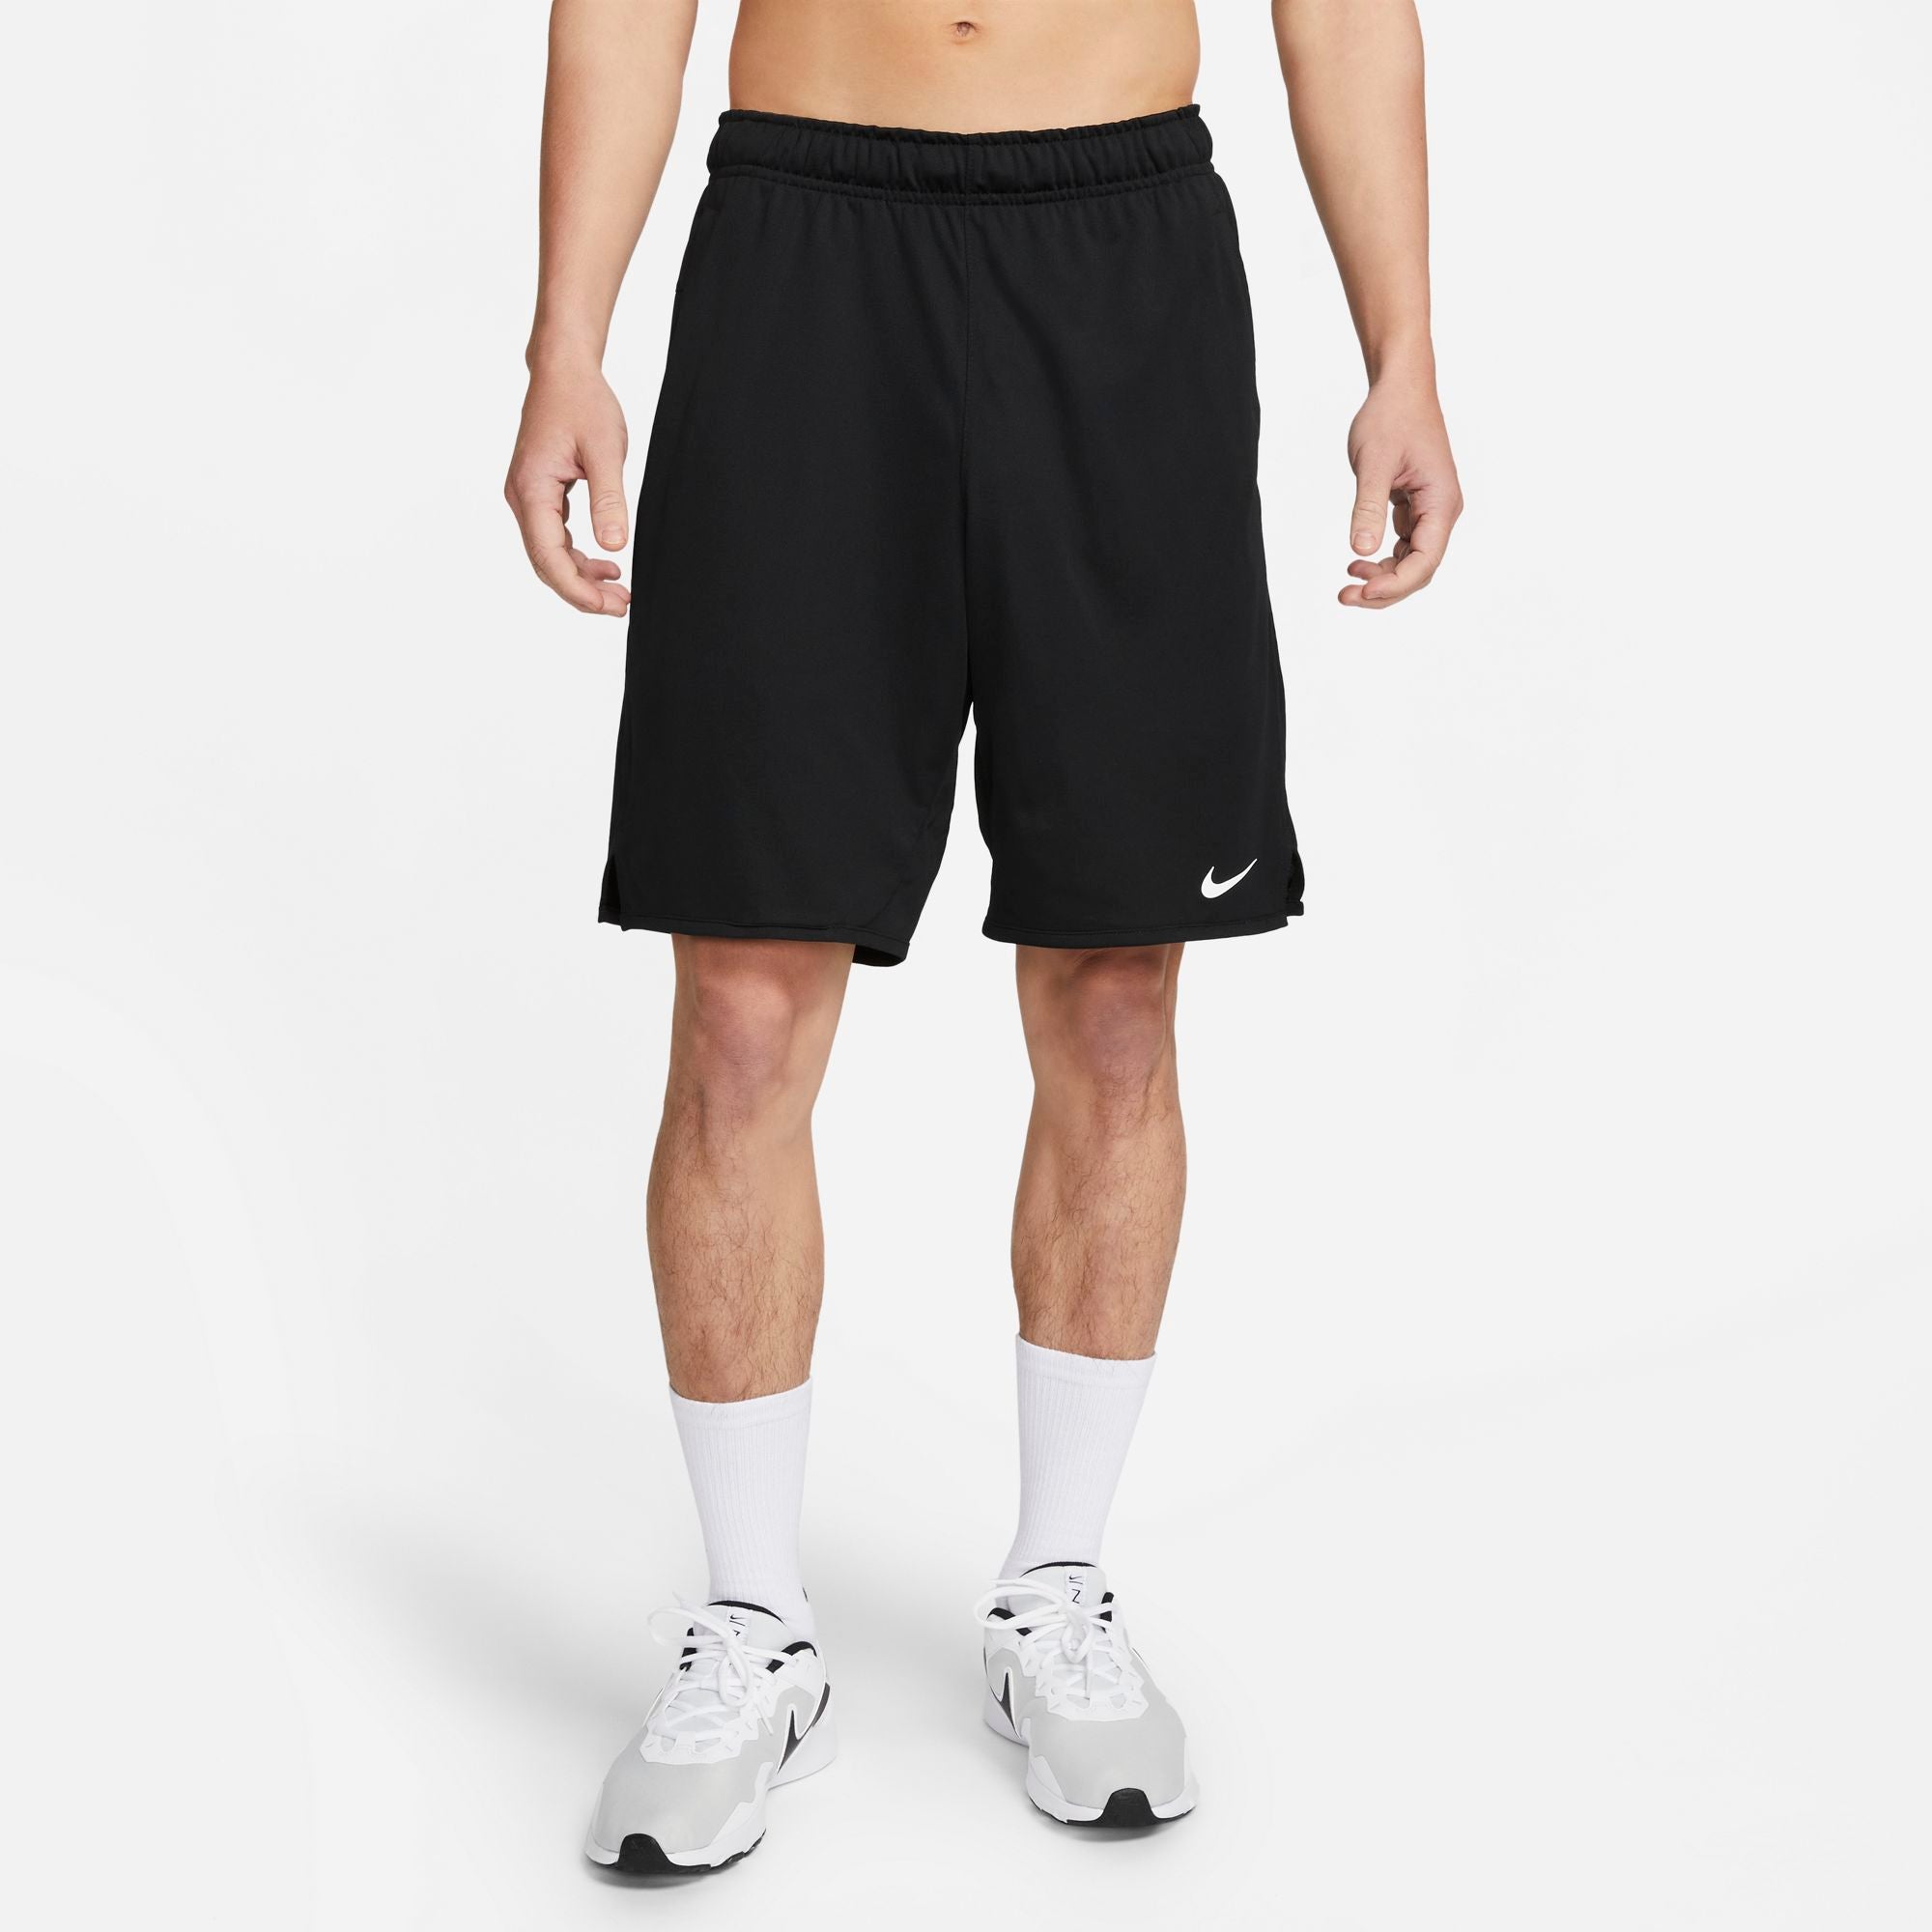 NIKE DRI-FIT TOTALITY MENS 9" UNLINED SHORTS